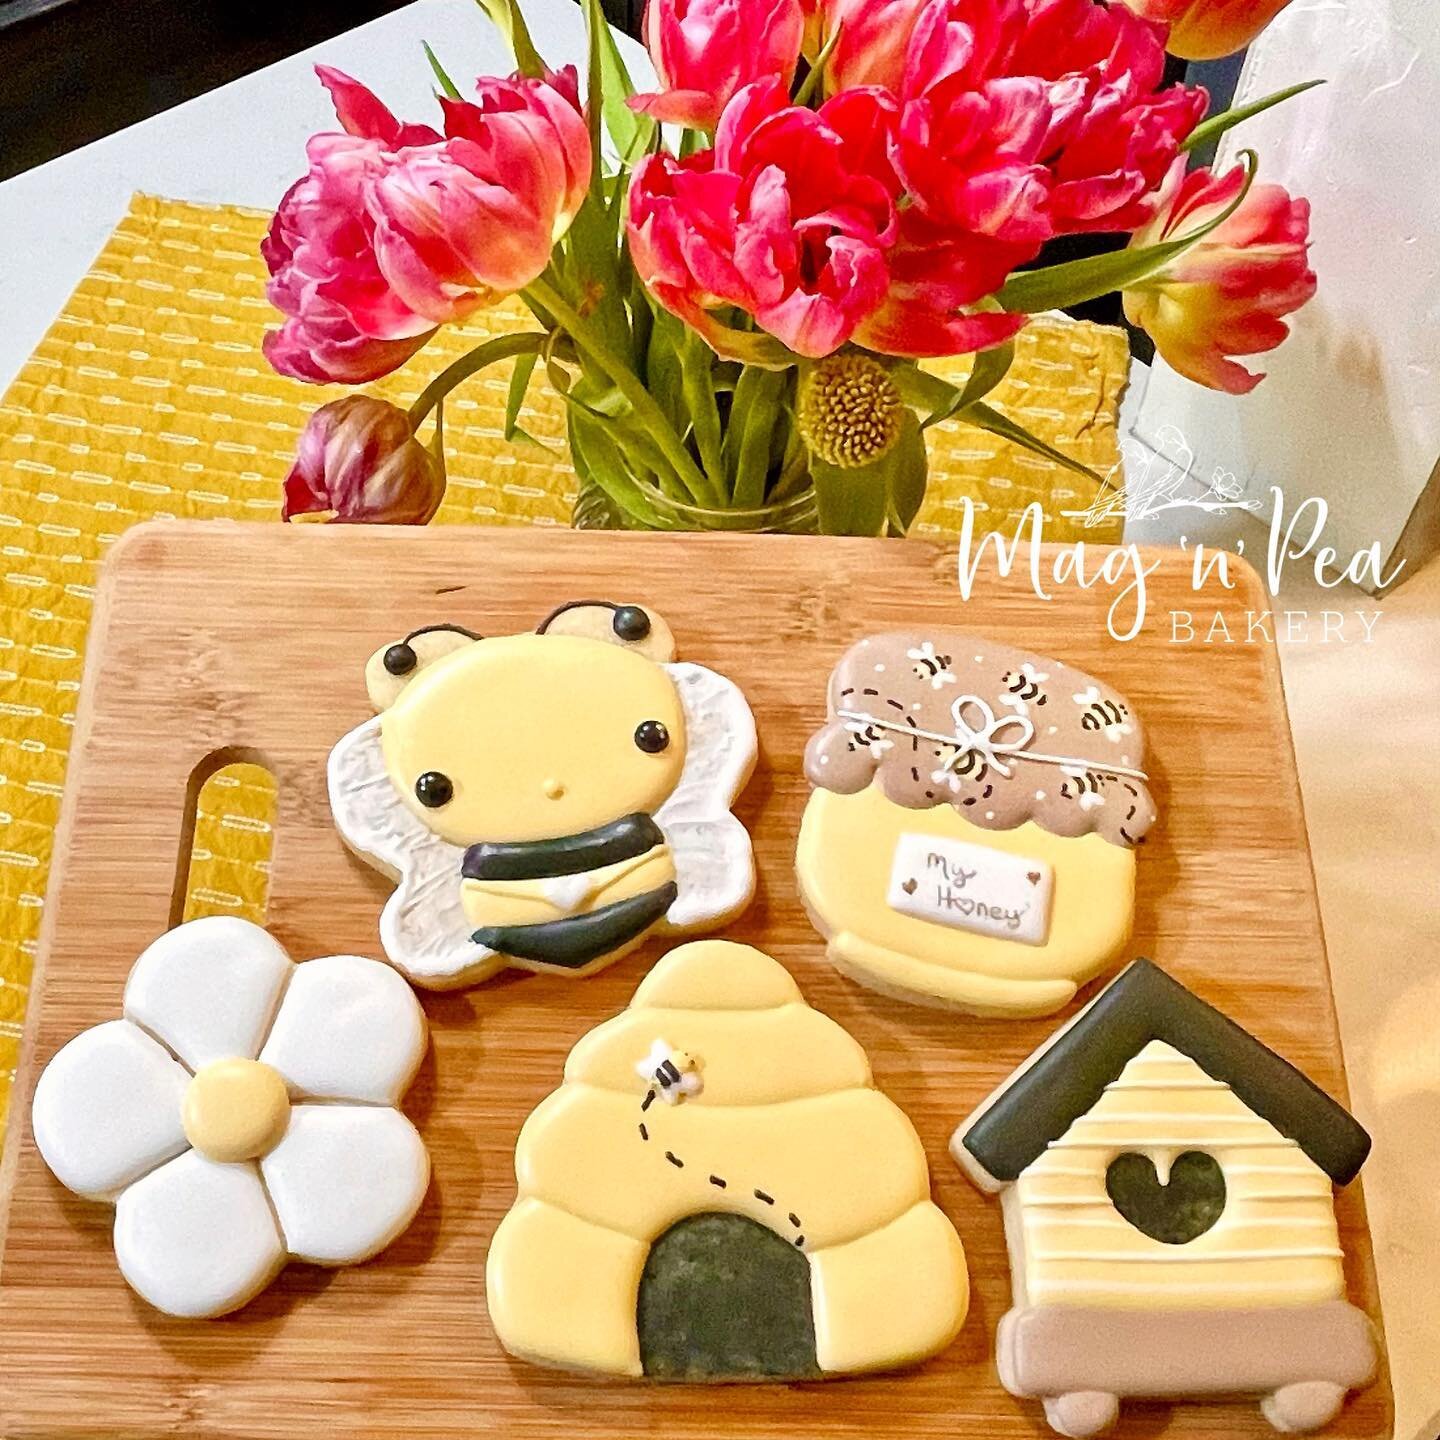 I had so much fun hosting the Honey Bee cookie decorating class this past weekend. Everyone walked away with super cute cookies and all had a unique touch that made them personal.

What I really love though is how people will come in completely skept